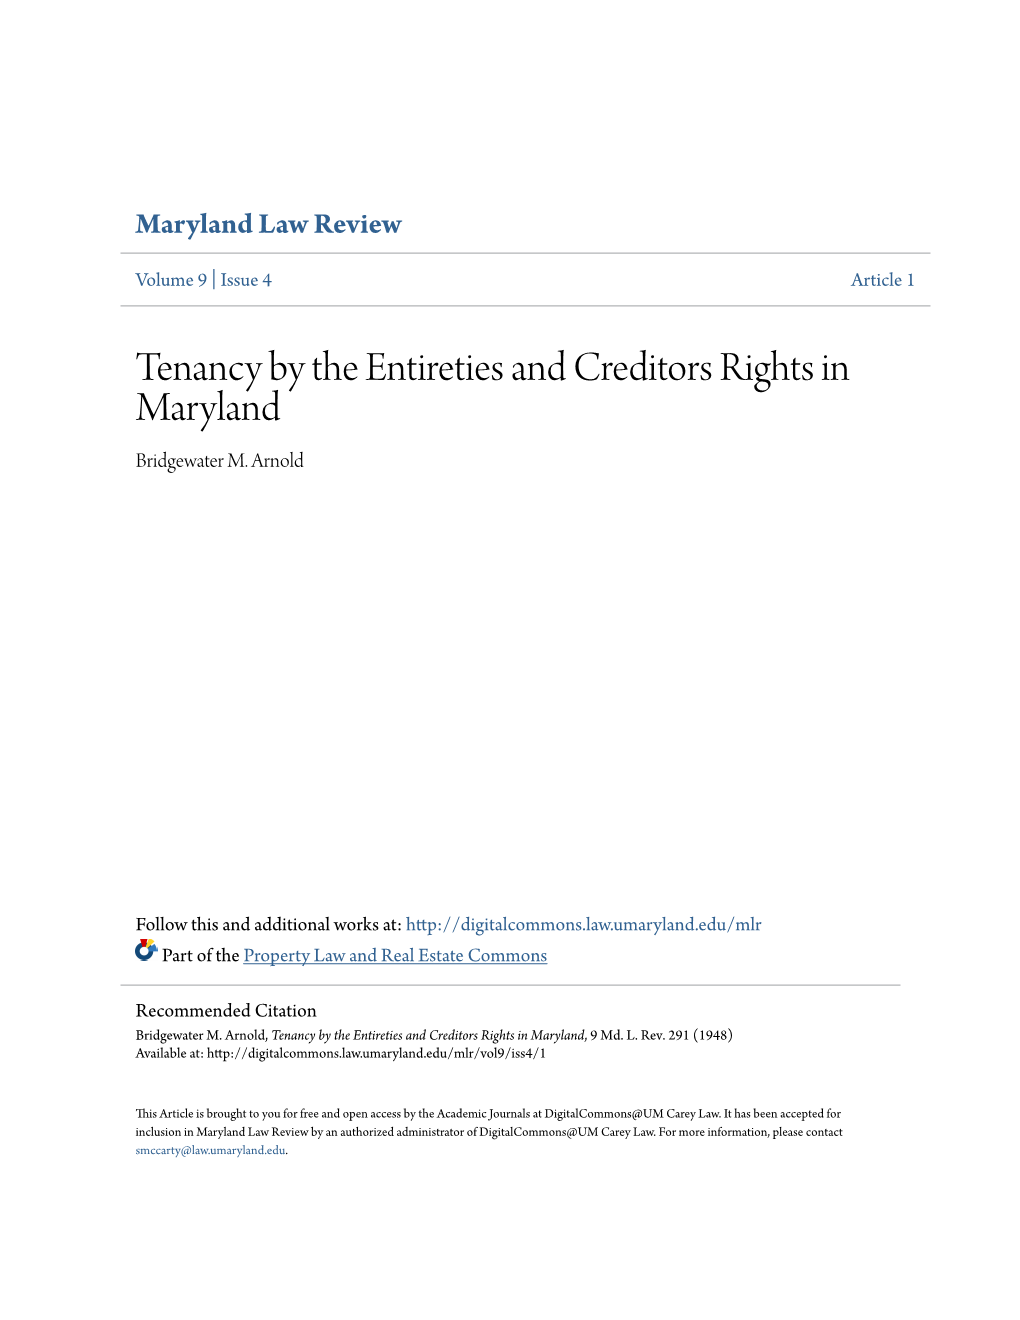 Tenancy by the Entireties and Creditors Rights in Maryland Bridgewater M